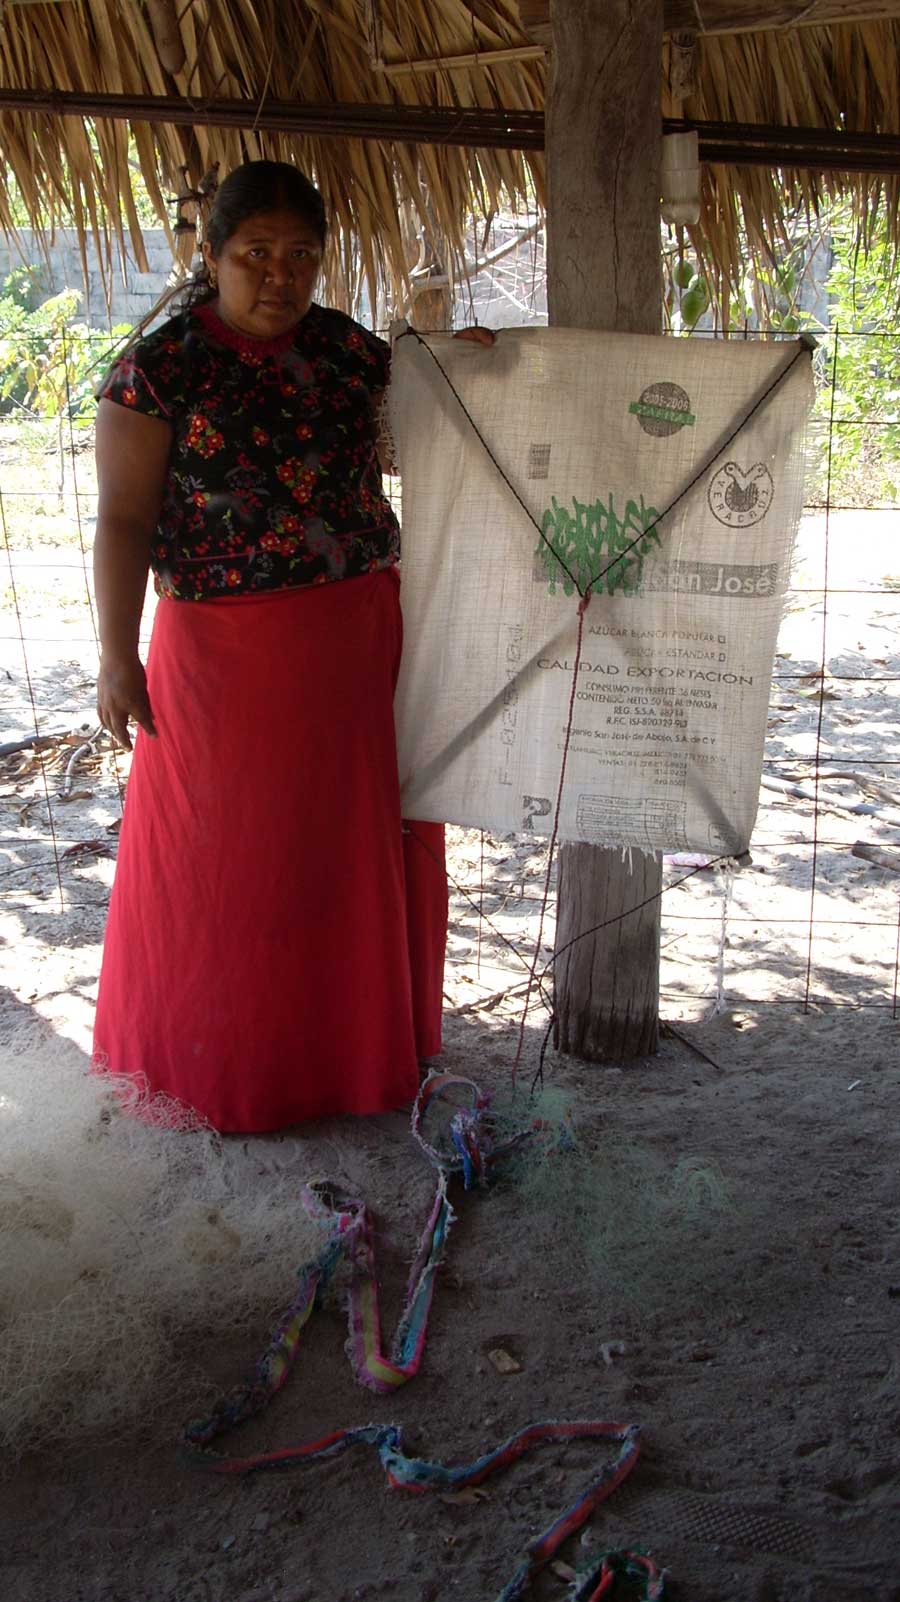 A villager stands alongside a fishing kite and nets. Using kites to fish during a Tehuano is a way of life for the people of San Mateo and Santa Maria del Mar in the Isthmus of Tehuantepec, Mexico. (Courtesy C. Ornelas)